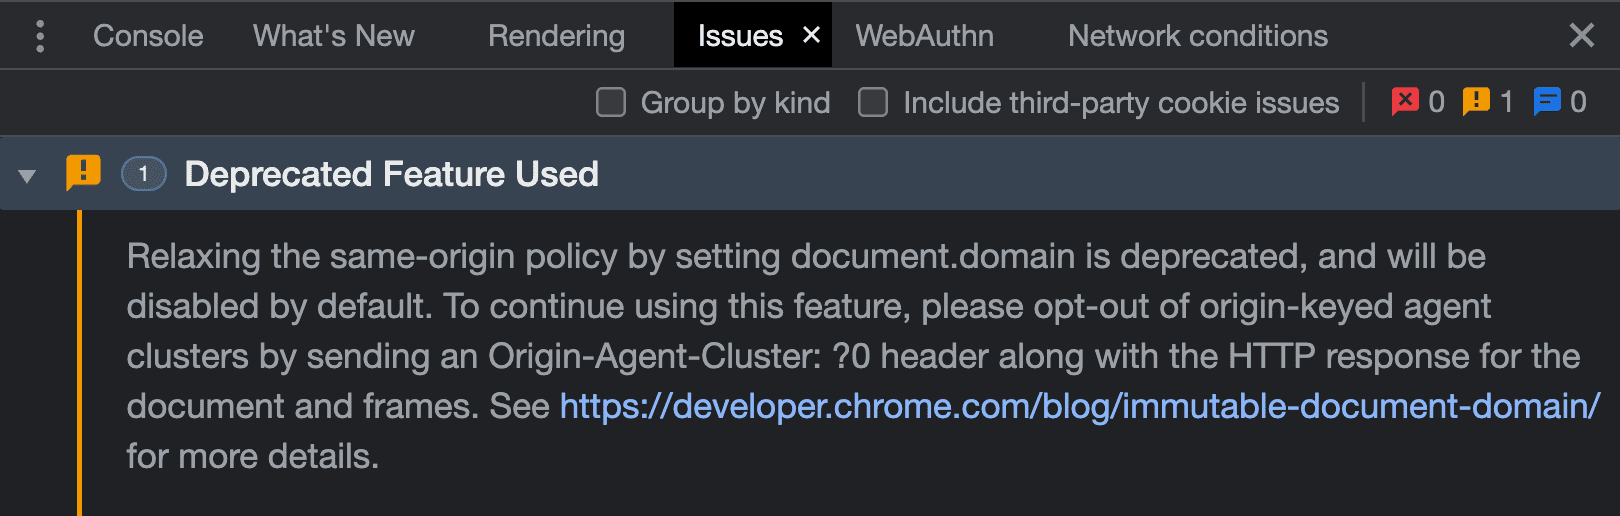 Screenshot of the issue warning in DevTools